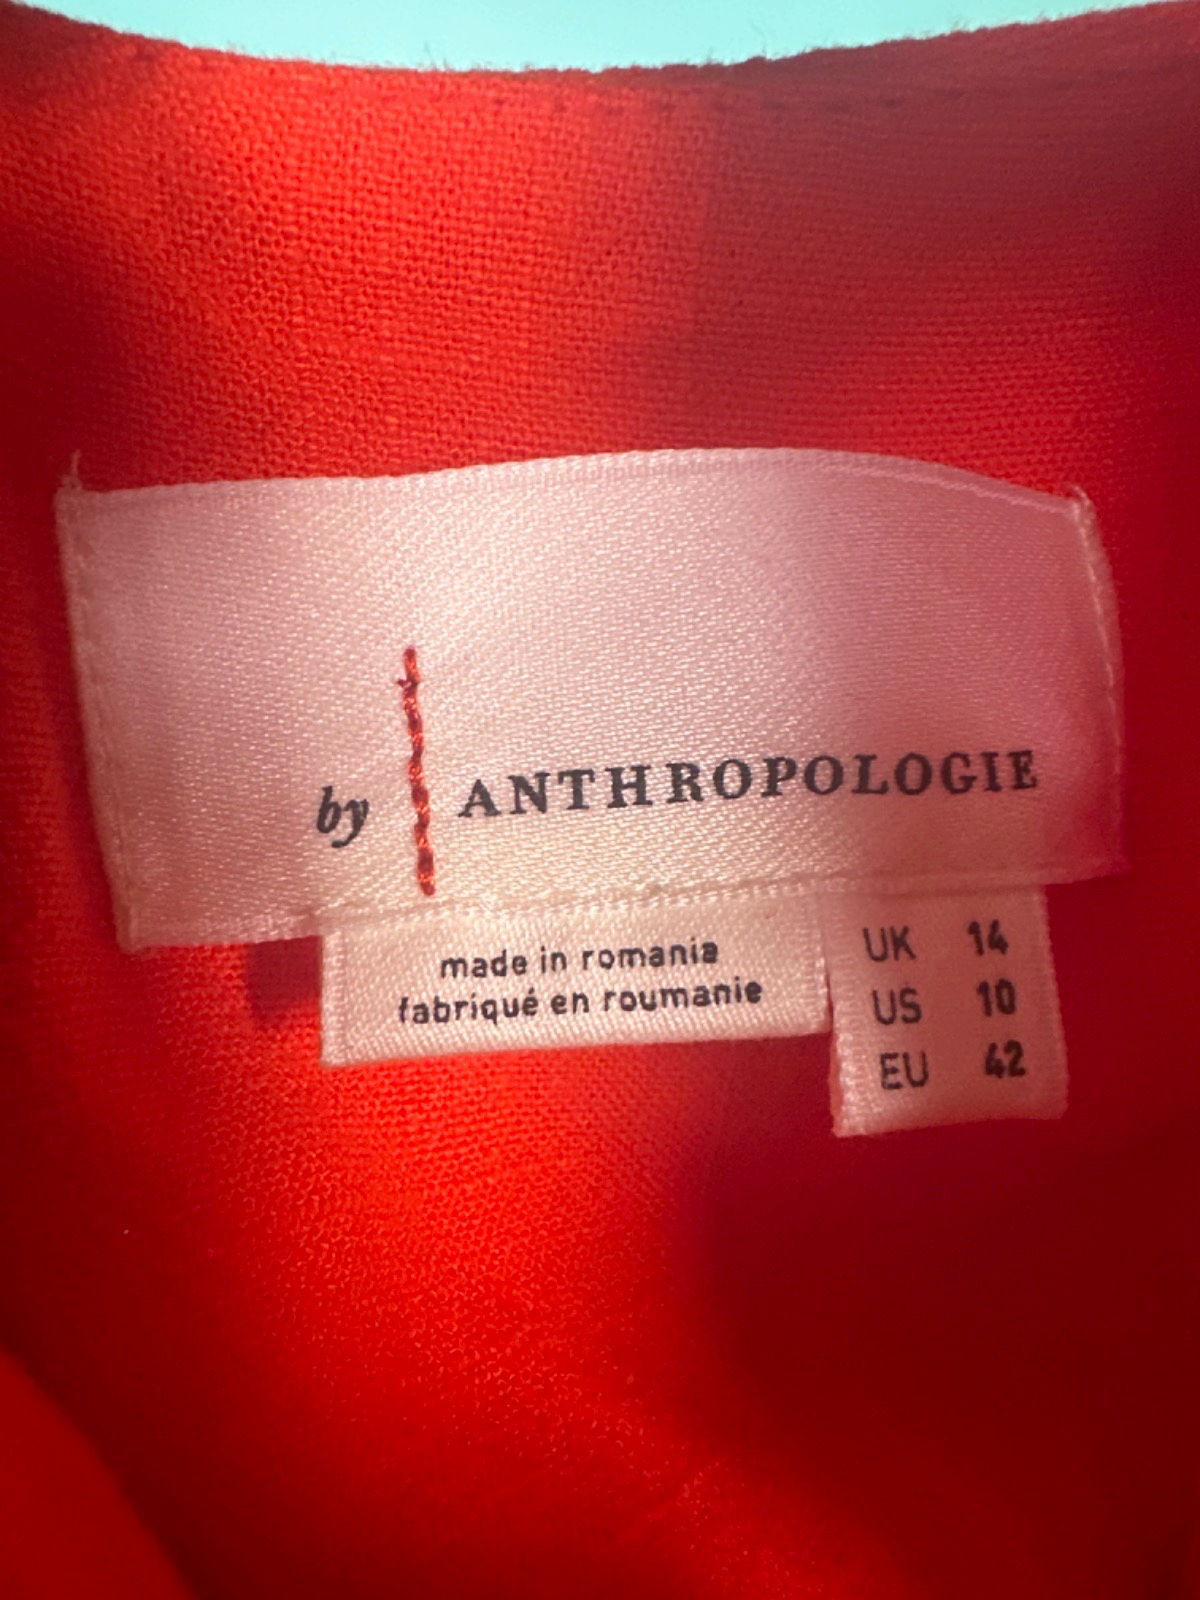 Anthropologie Red Knot Front Dress UK 14